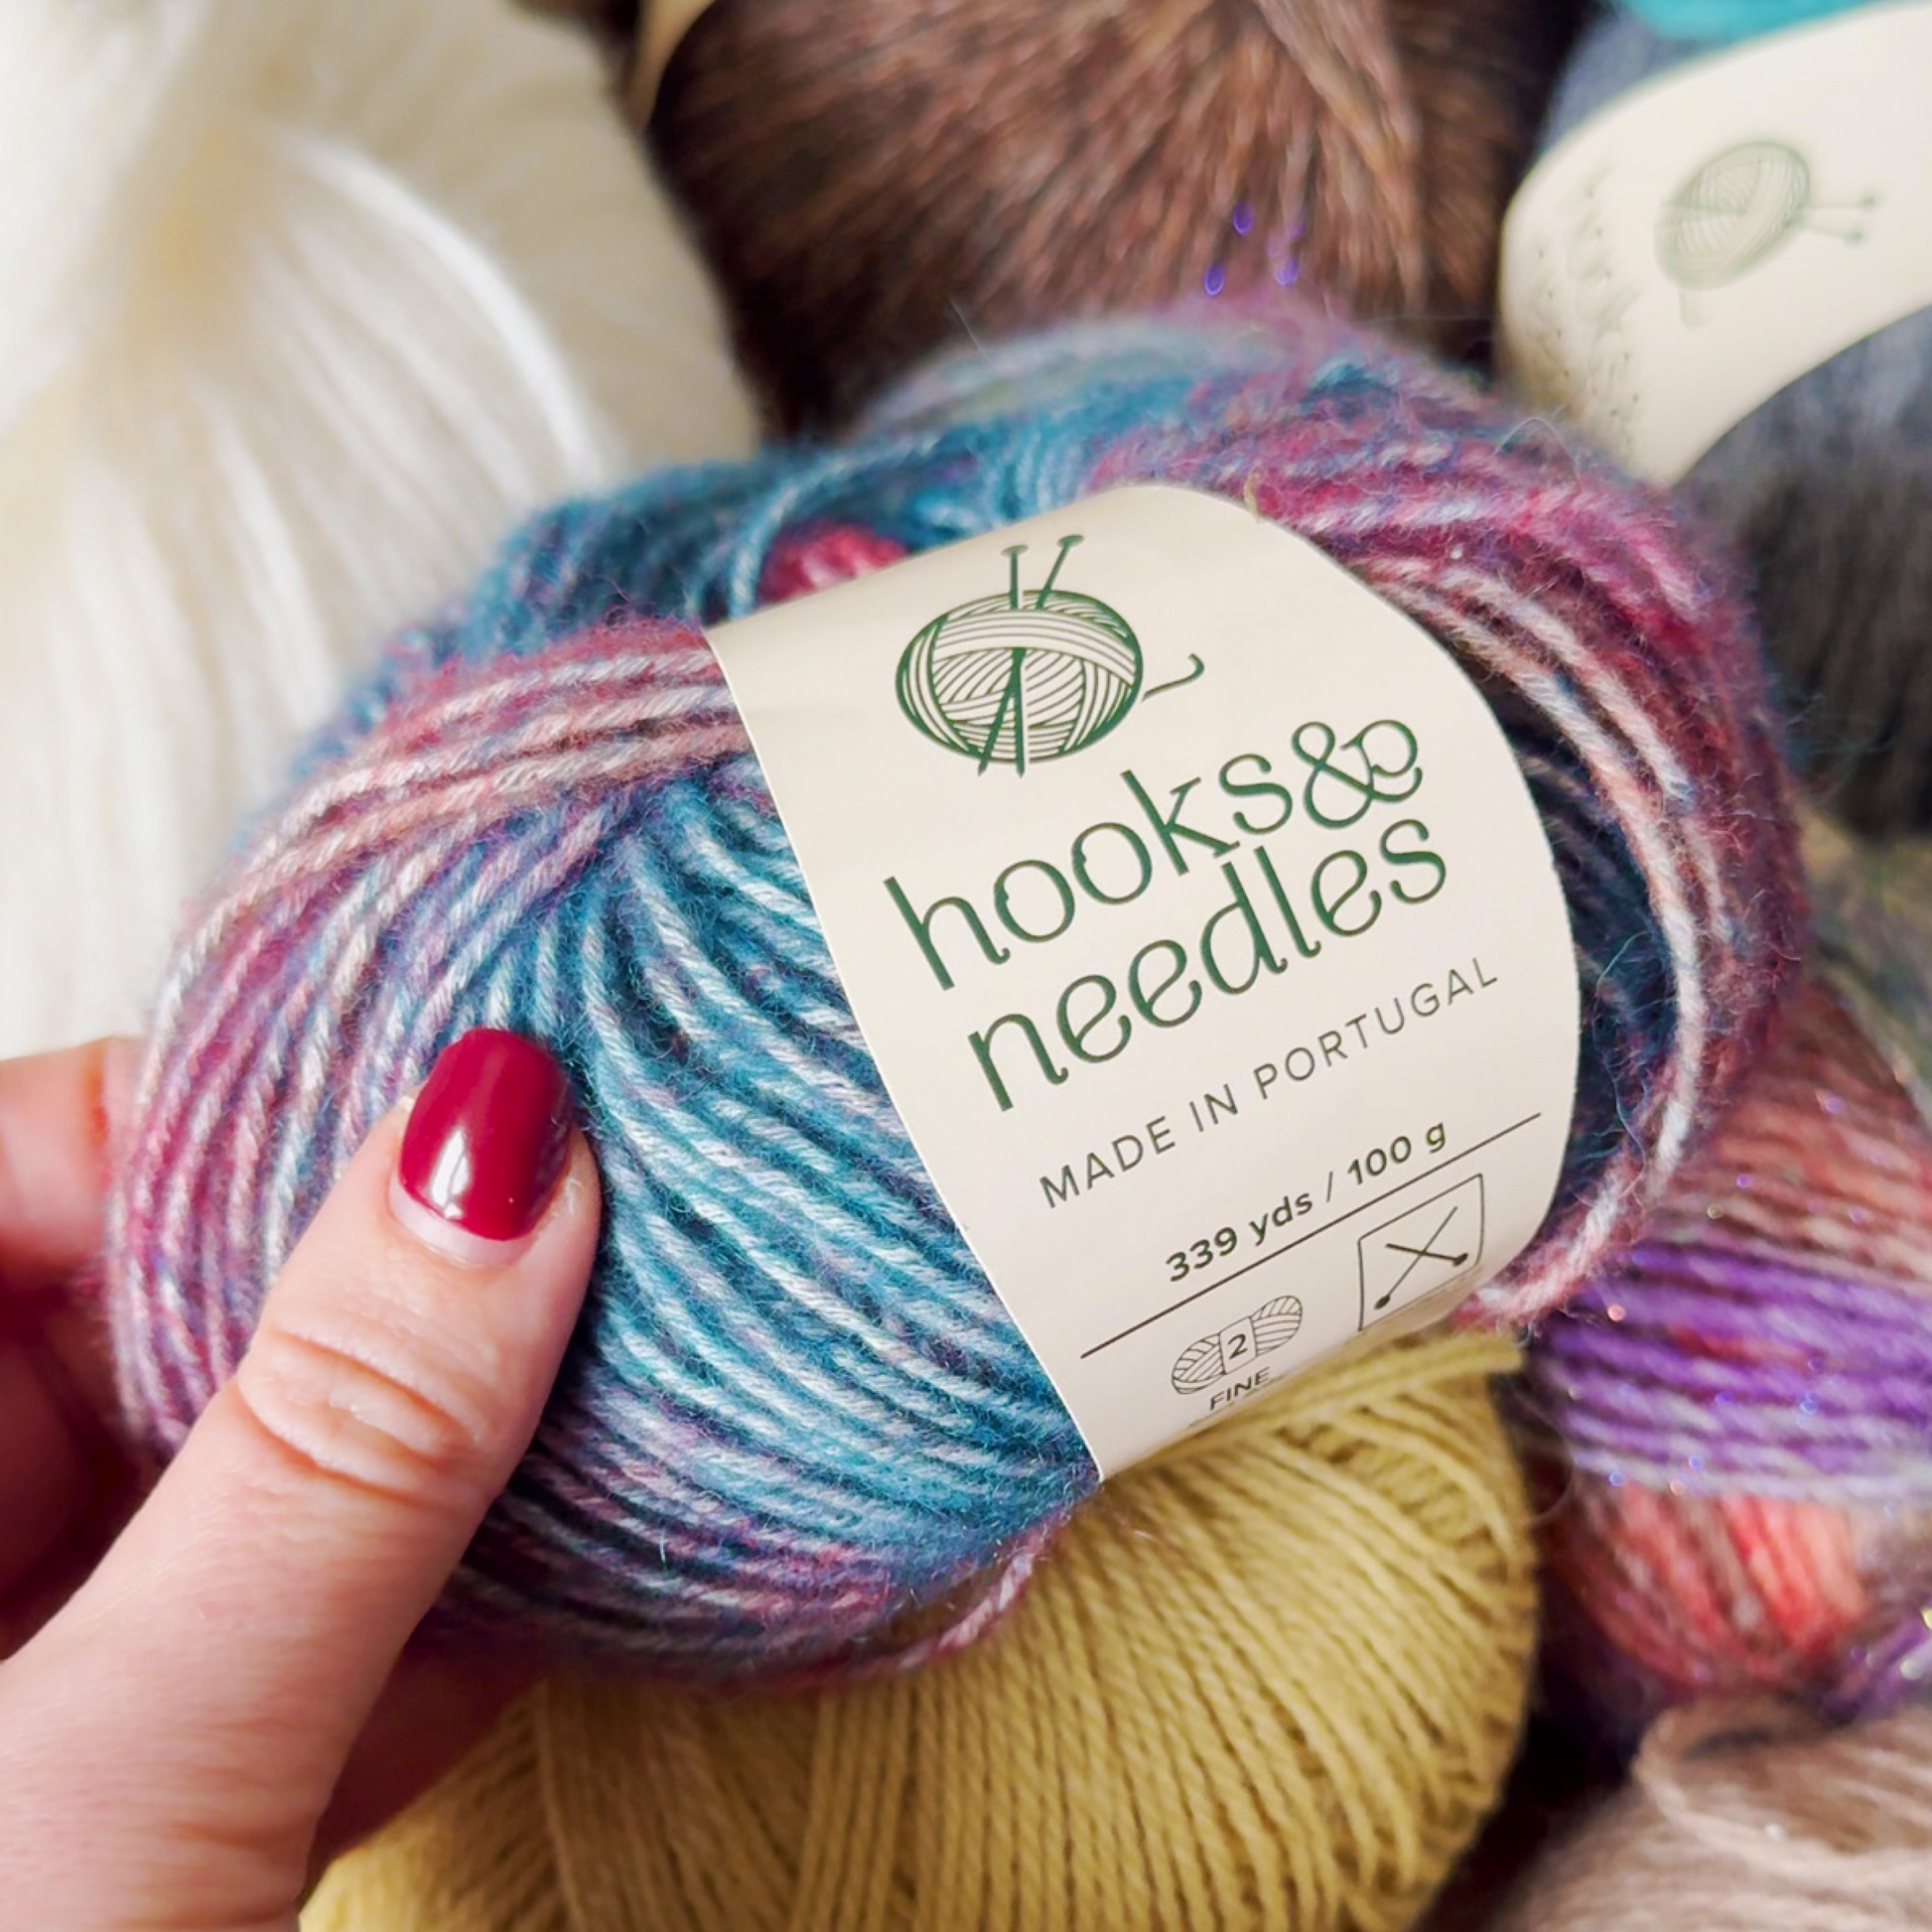 A person holds a skein of multicolored yarn labeled "6-Month-Prepaid Hooks & Needles Subscription Box #7, made in Portugal" amid other yarn skeins.